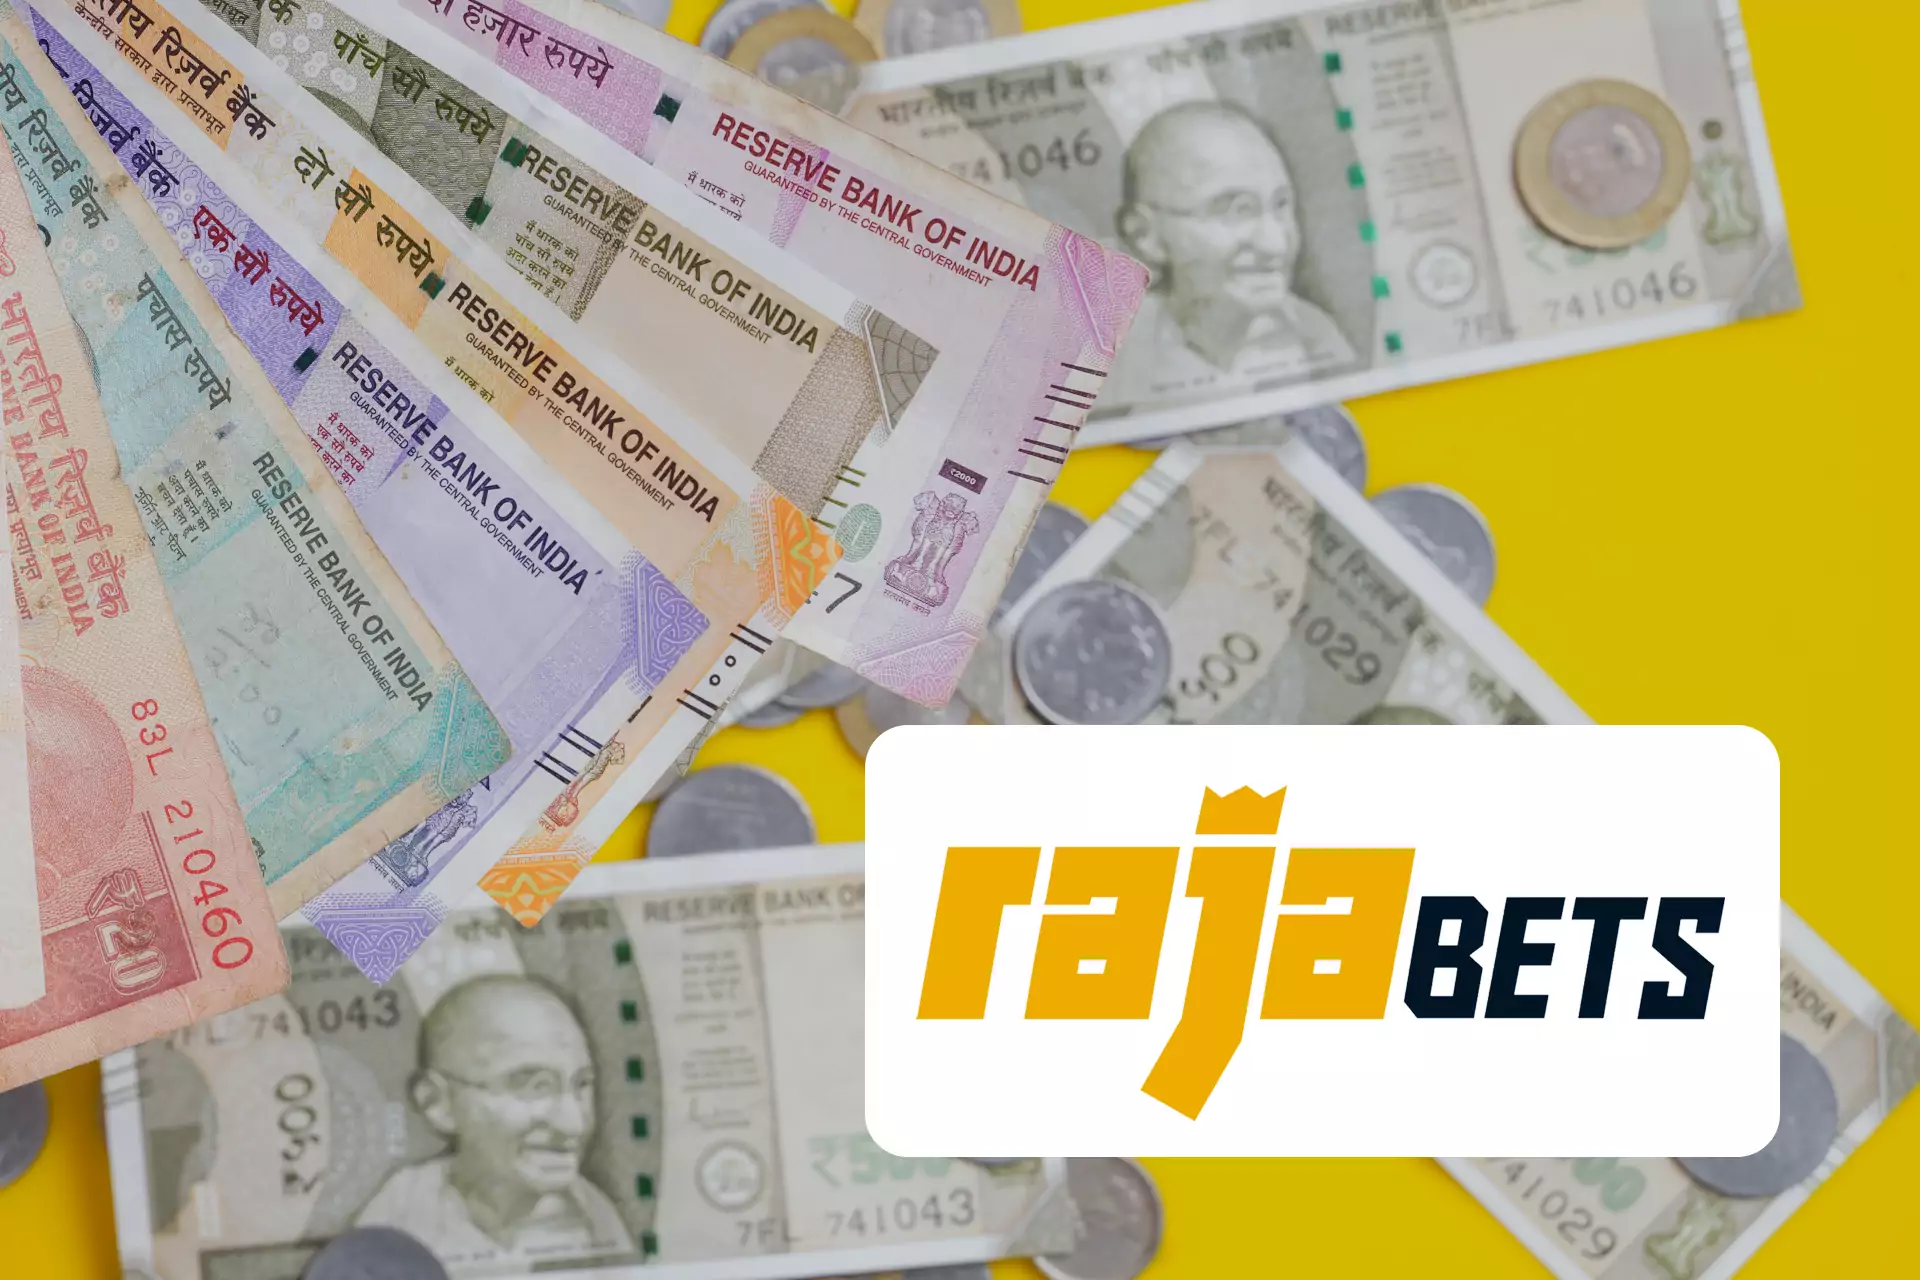 Use your usual payment system to deposit or withdraw funds from Rajabets.